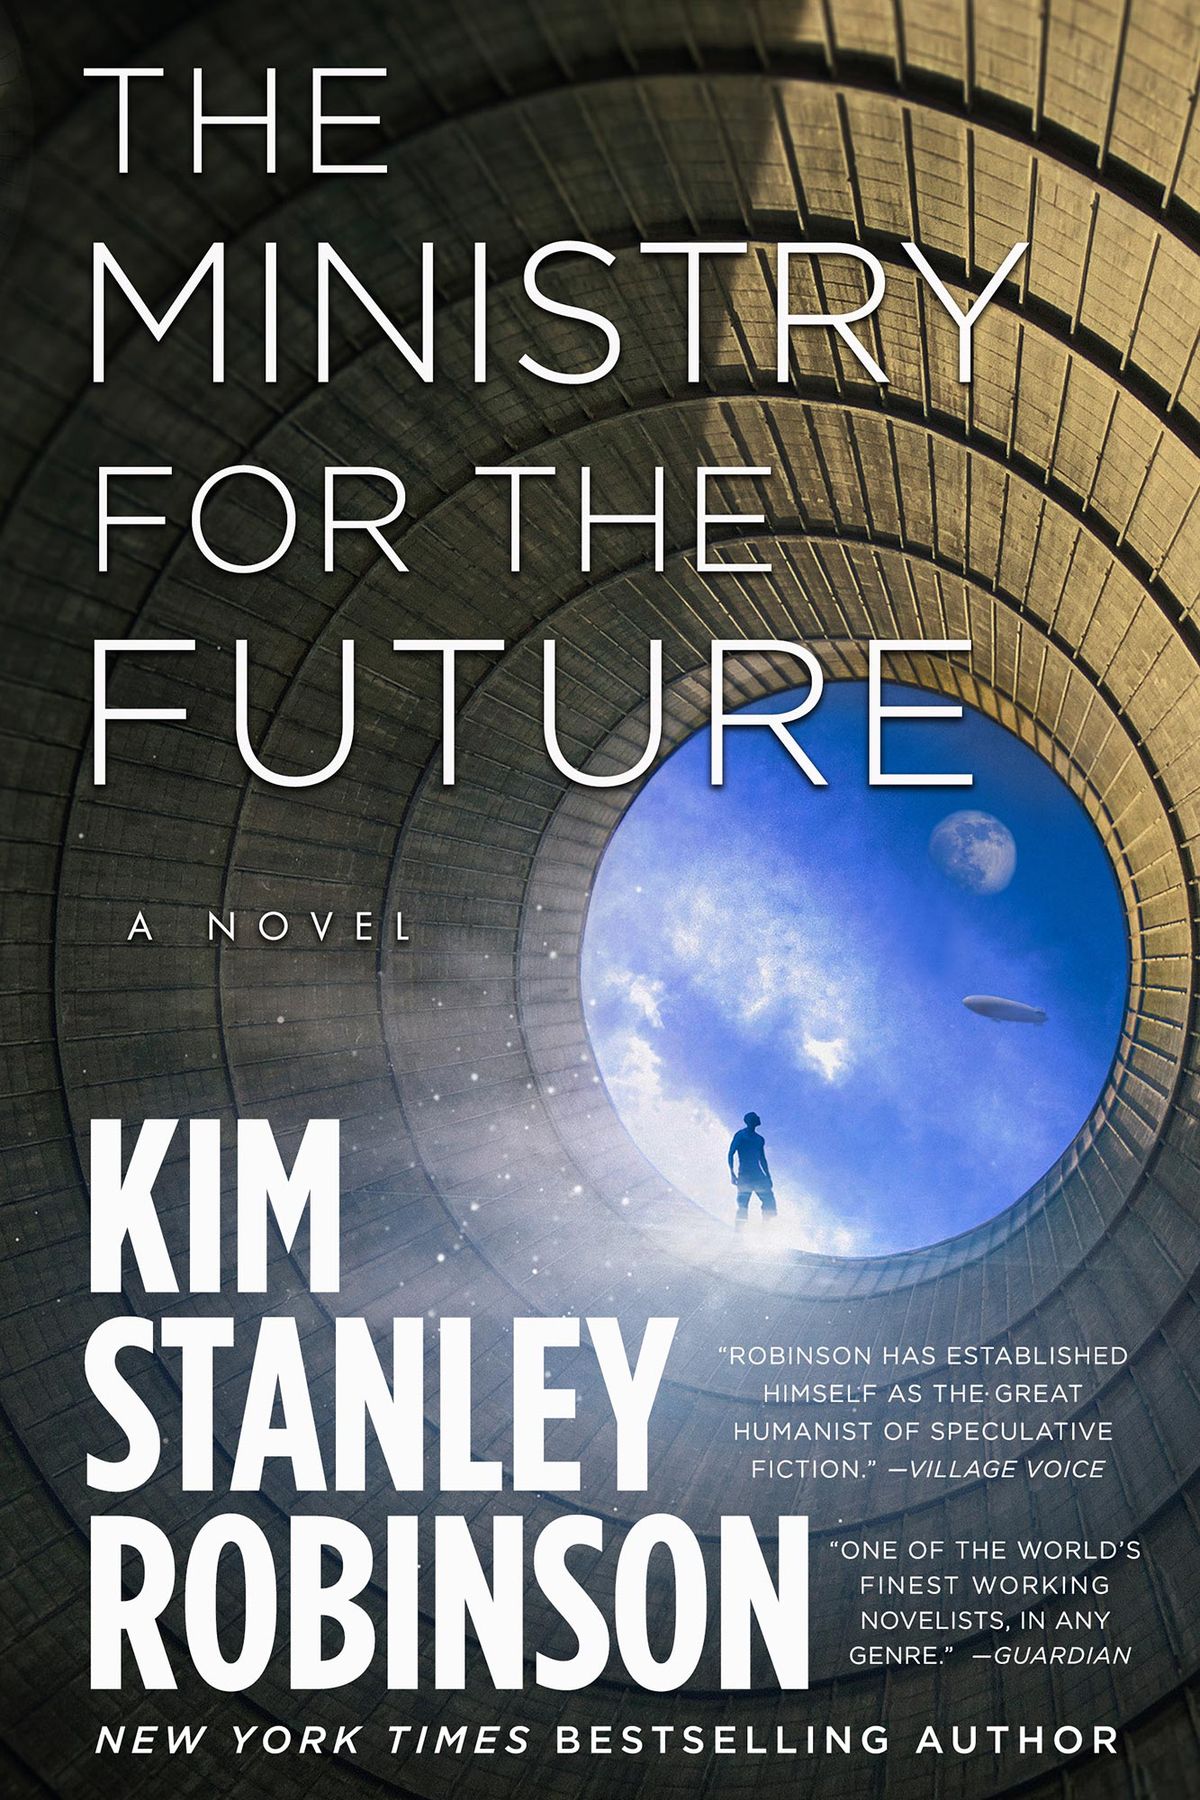 The cover of Kim Stanley Robinson’s Ministry For the Future